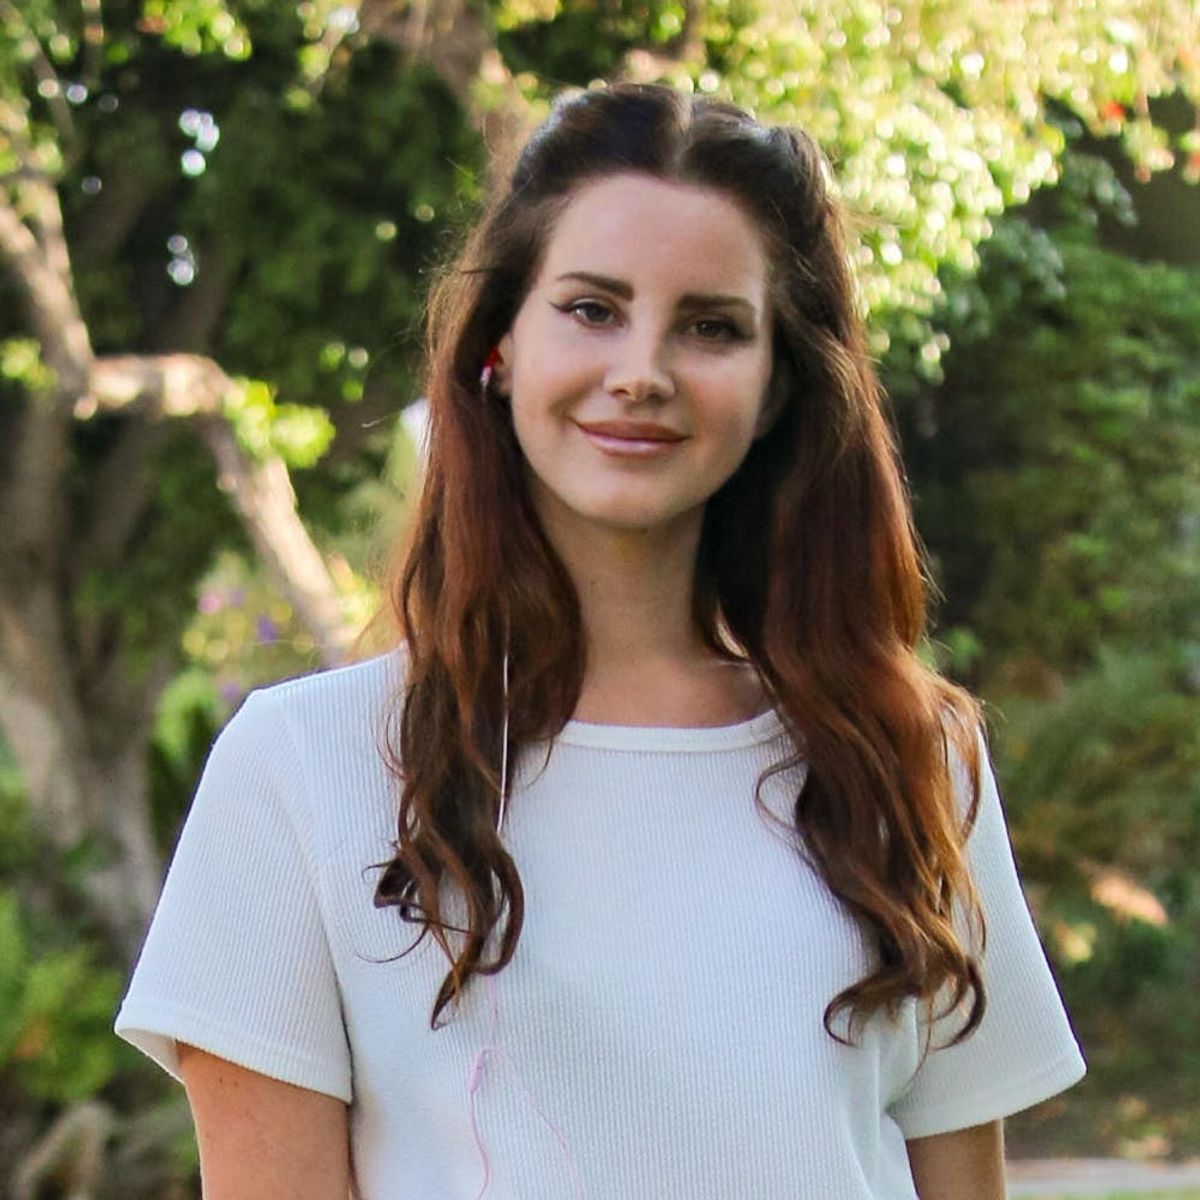 Lana Del Rey Is Using This Unusual Form of Protest to Get President Trump Out of Office